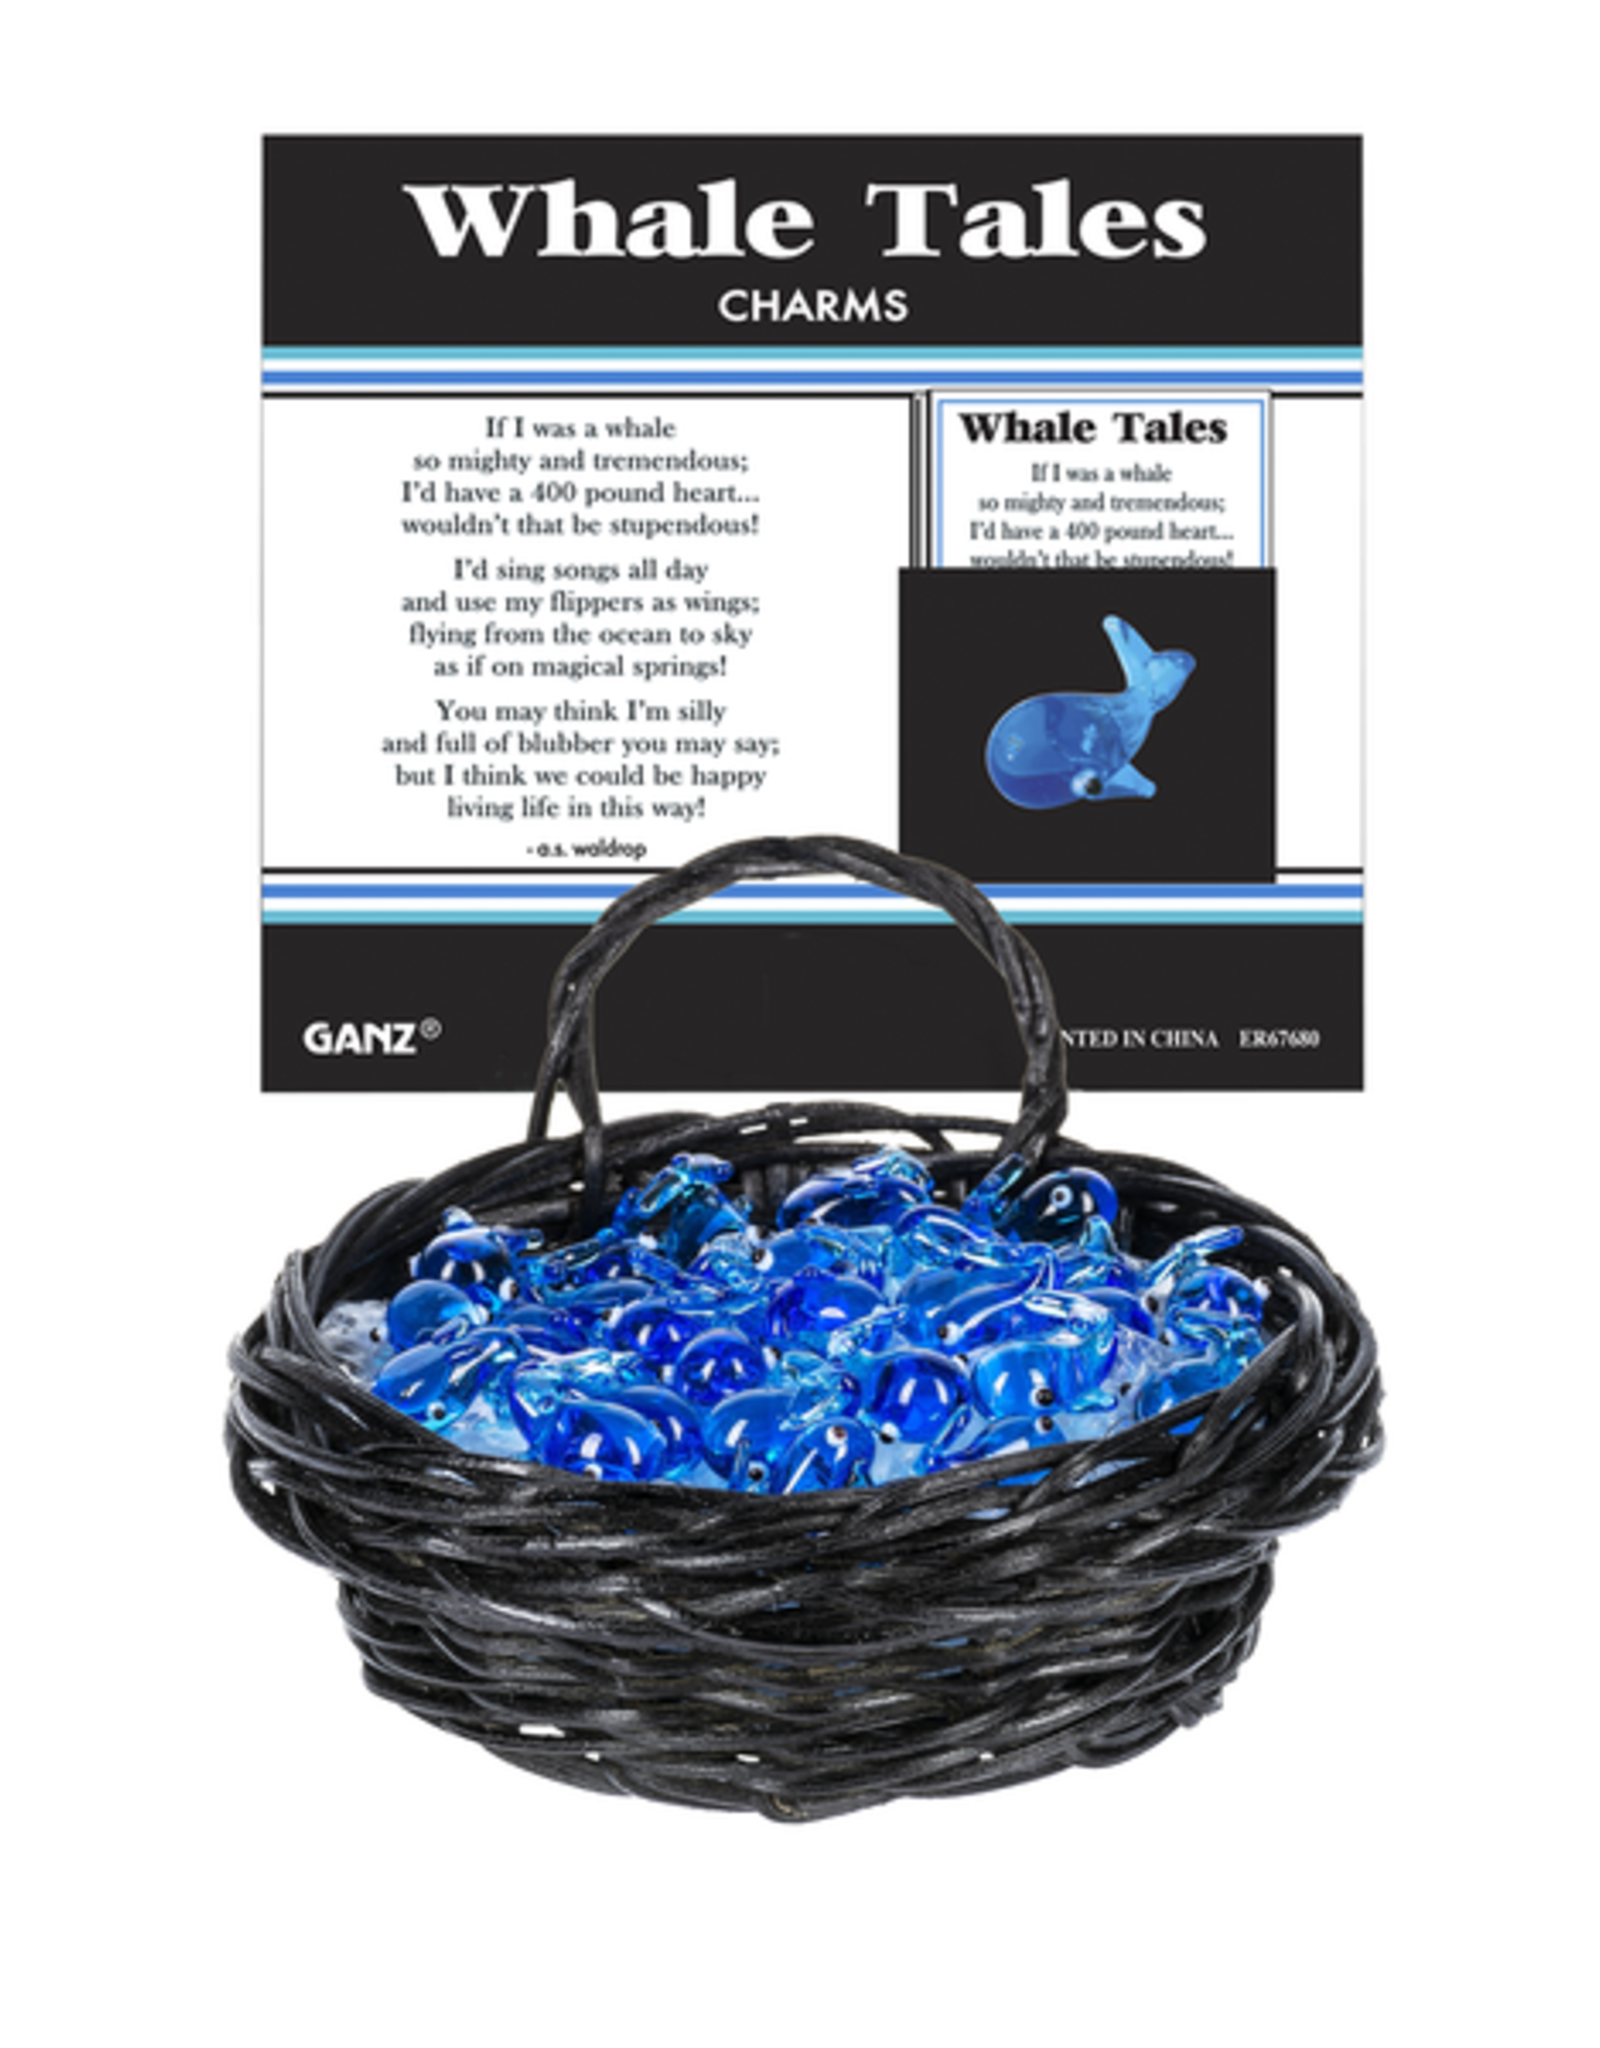 Ganz Whale Tales Charms